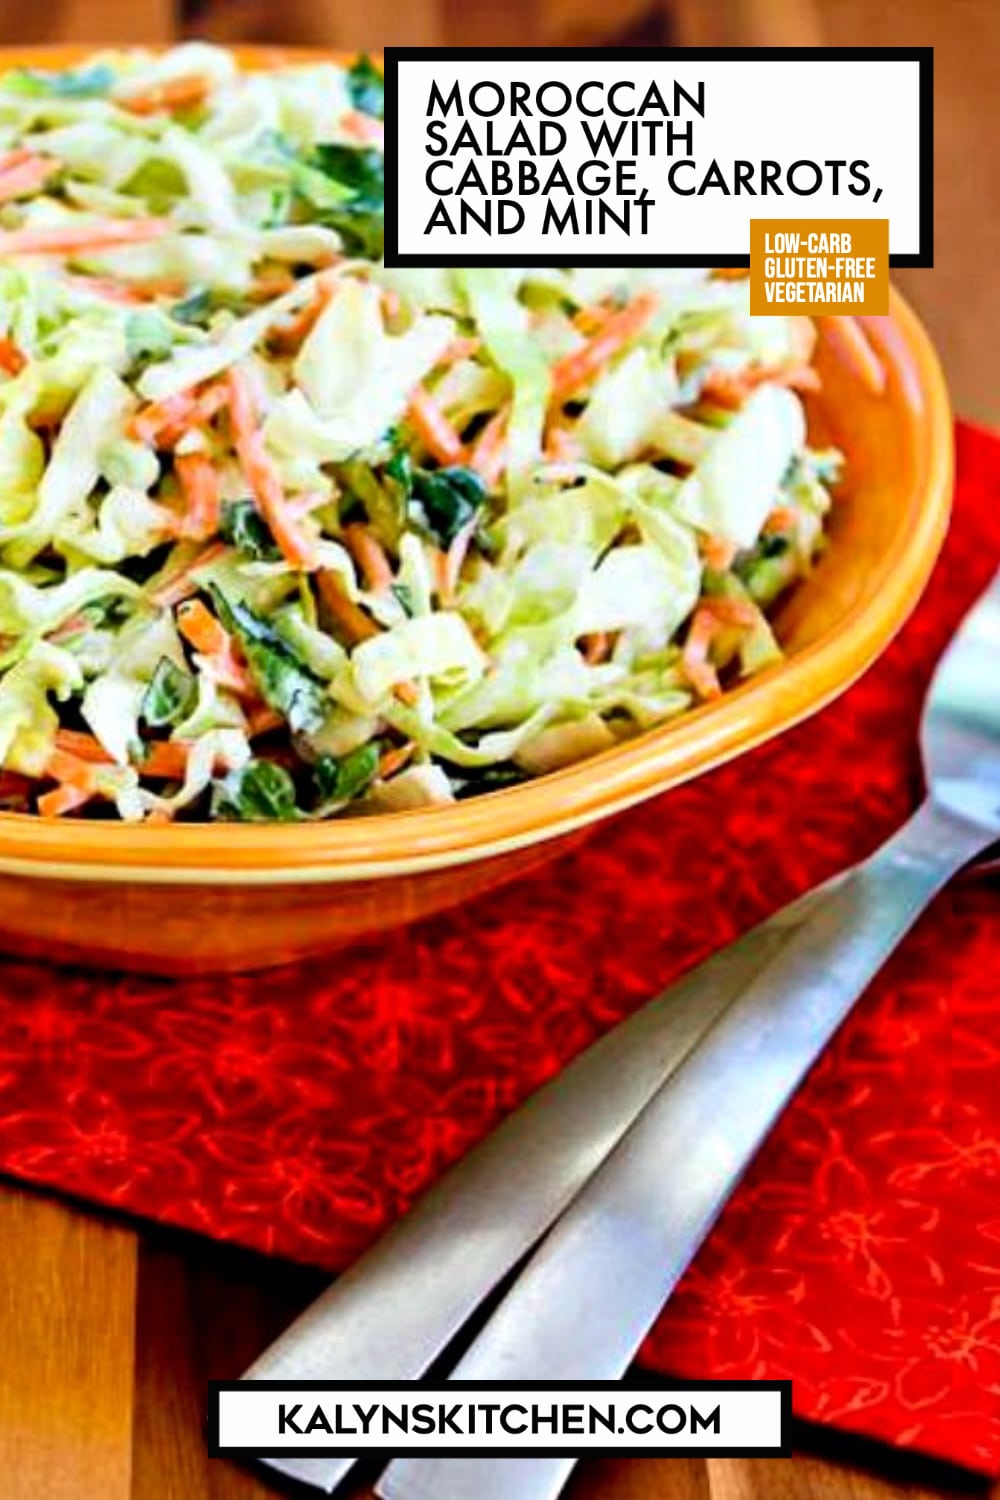 Pinterest image of Moroccan Salad with Cabbage, Carrots, and Mint